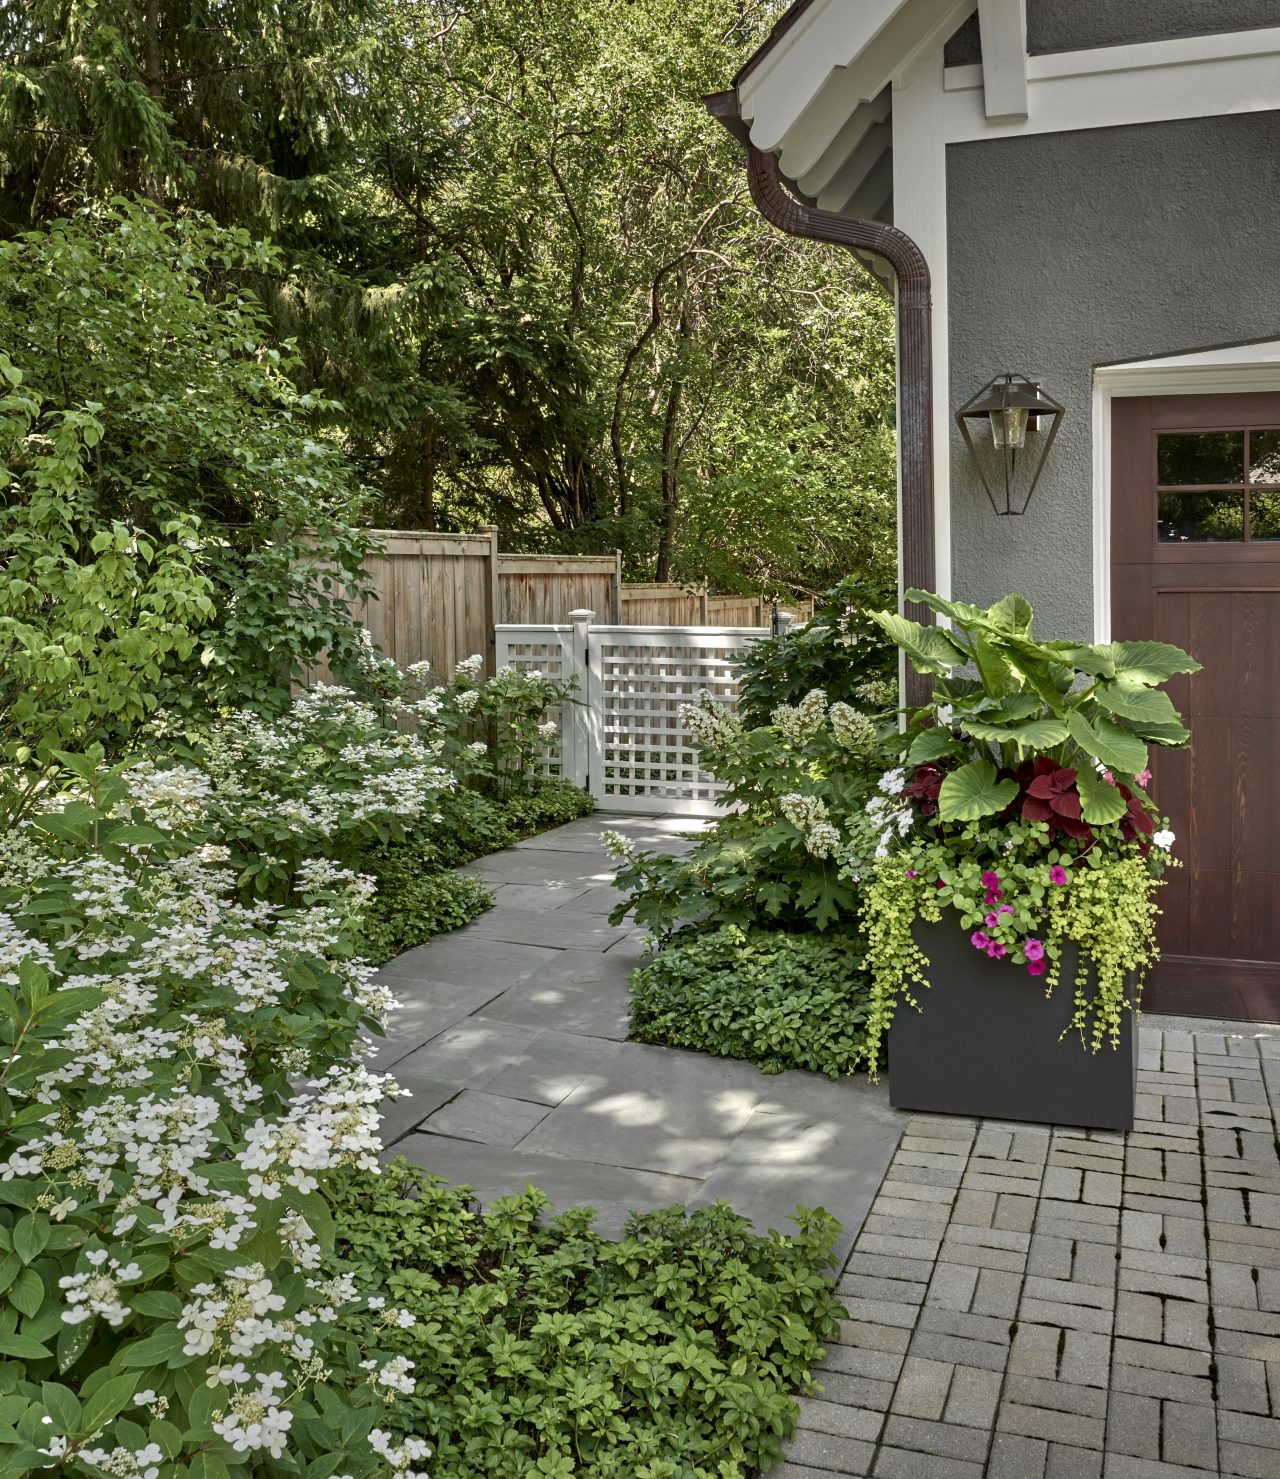 Annual containers, brick paver driveway, stone path